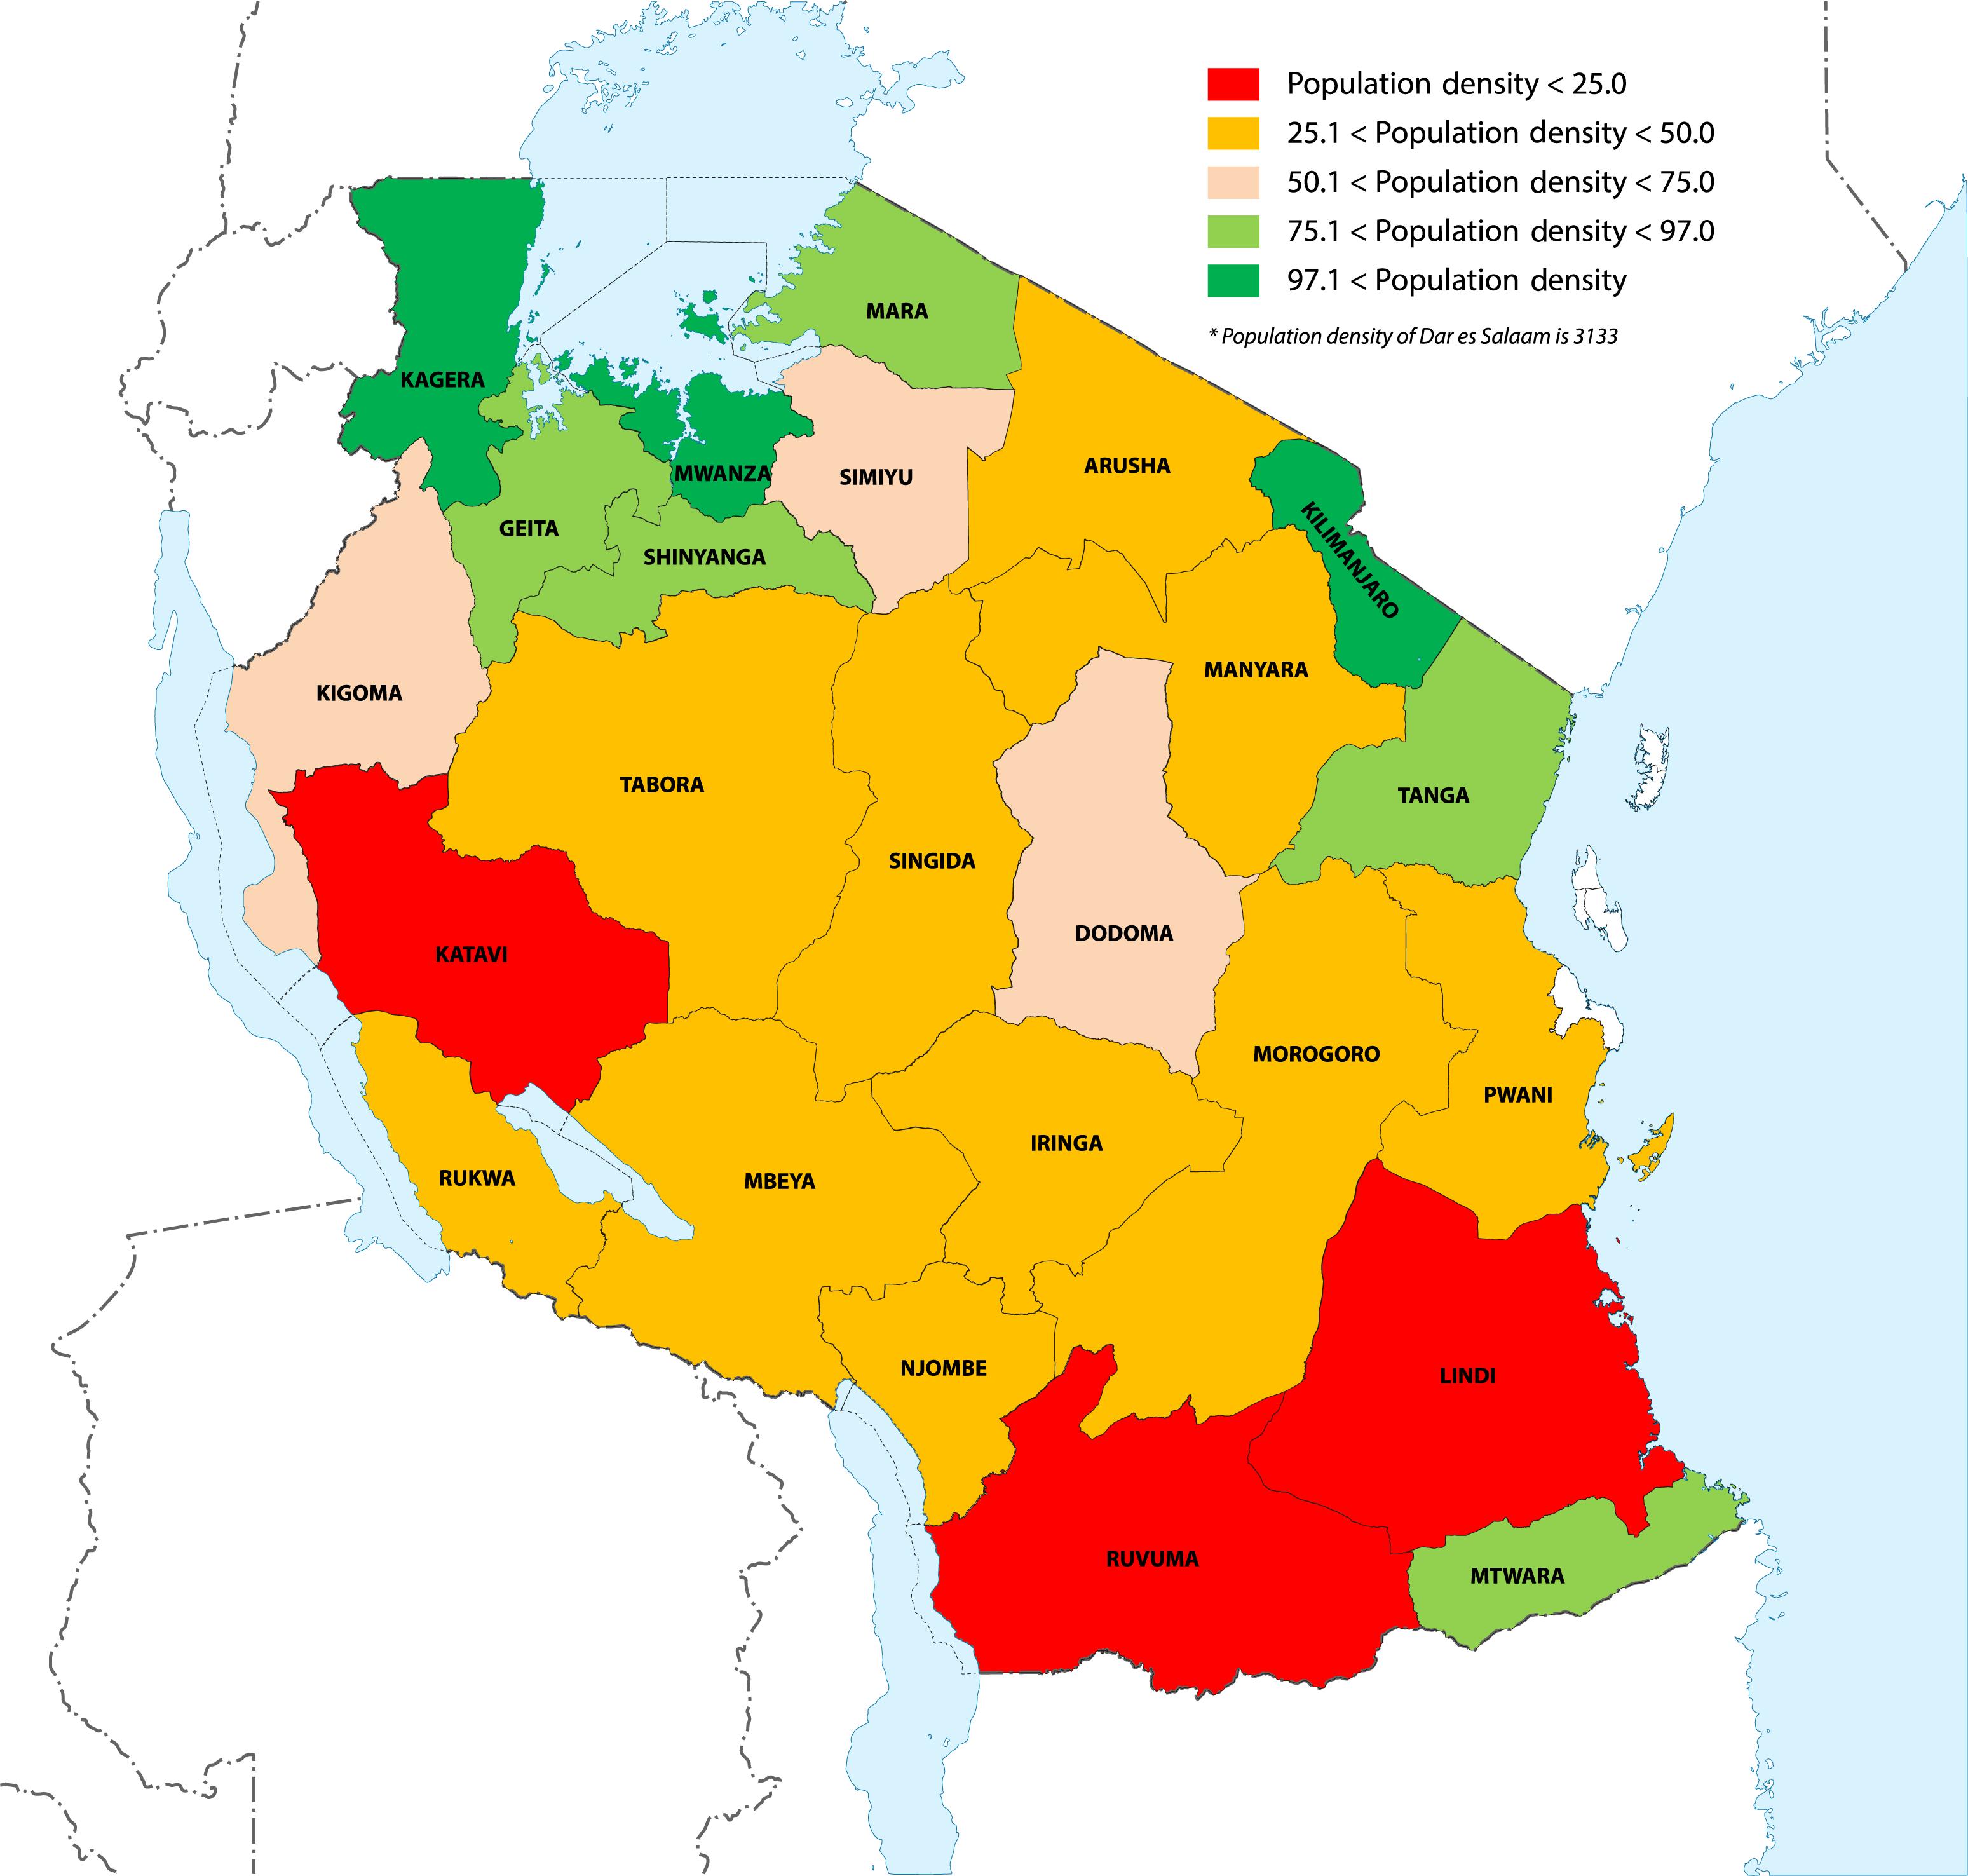 Tanzania Population Map Tanzania Population Density Map Eastern Africa Africa